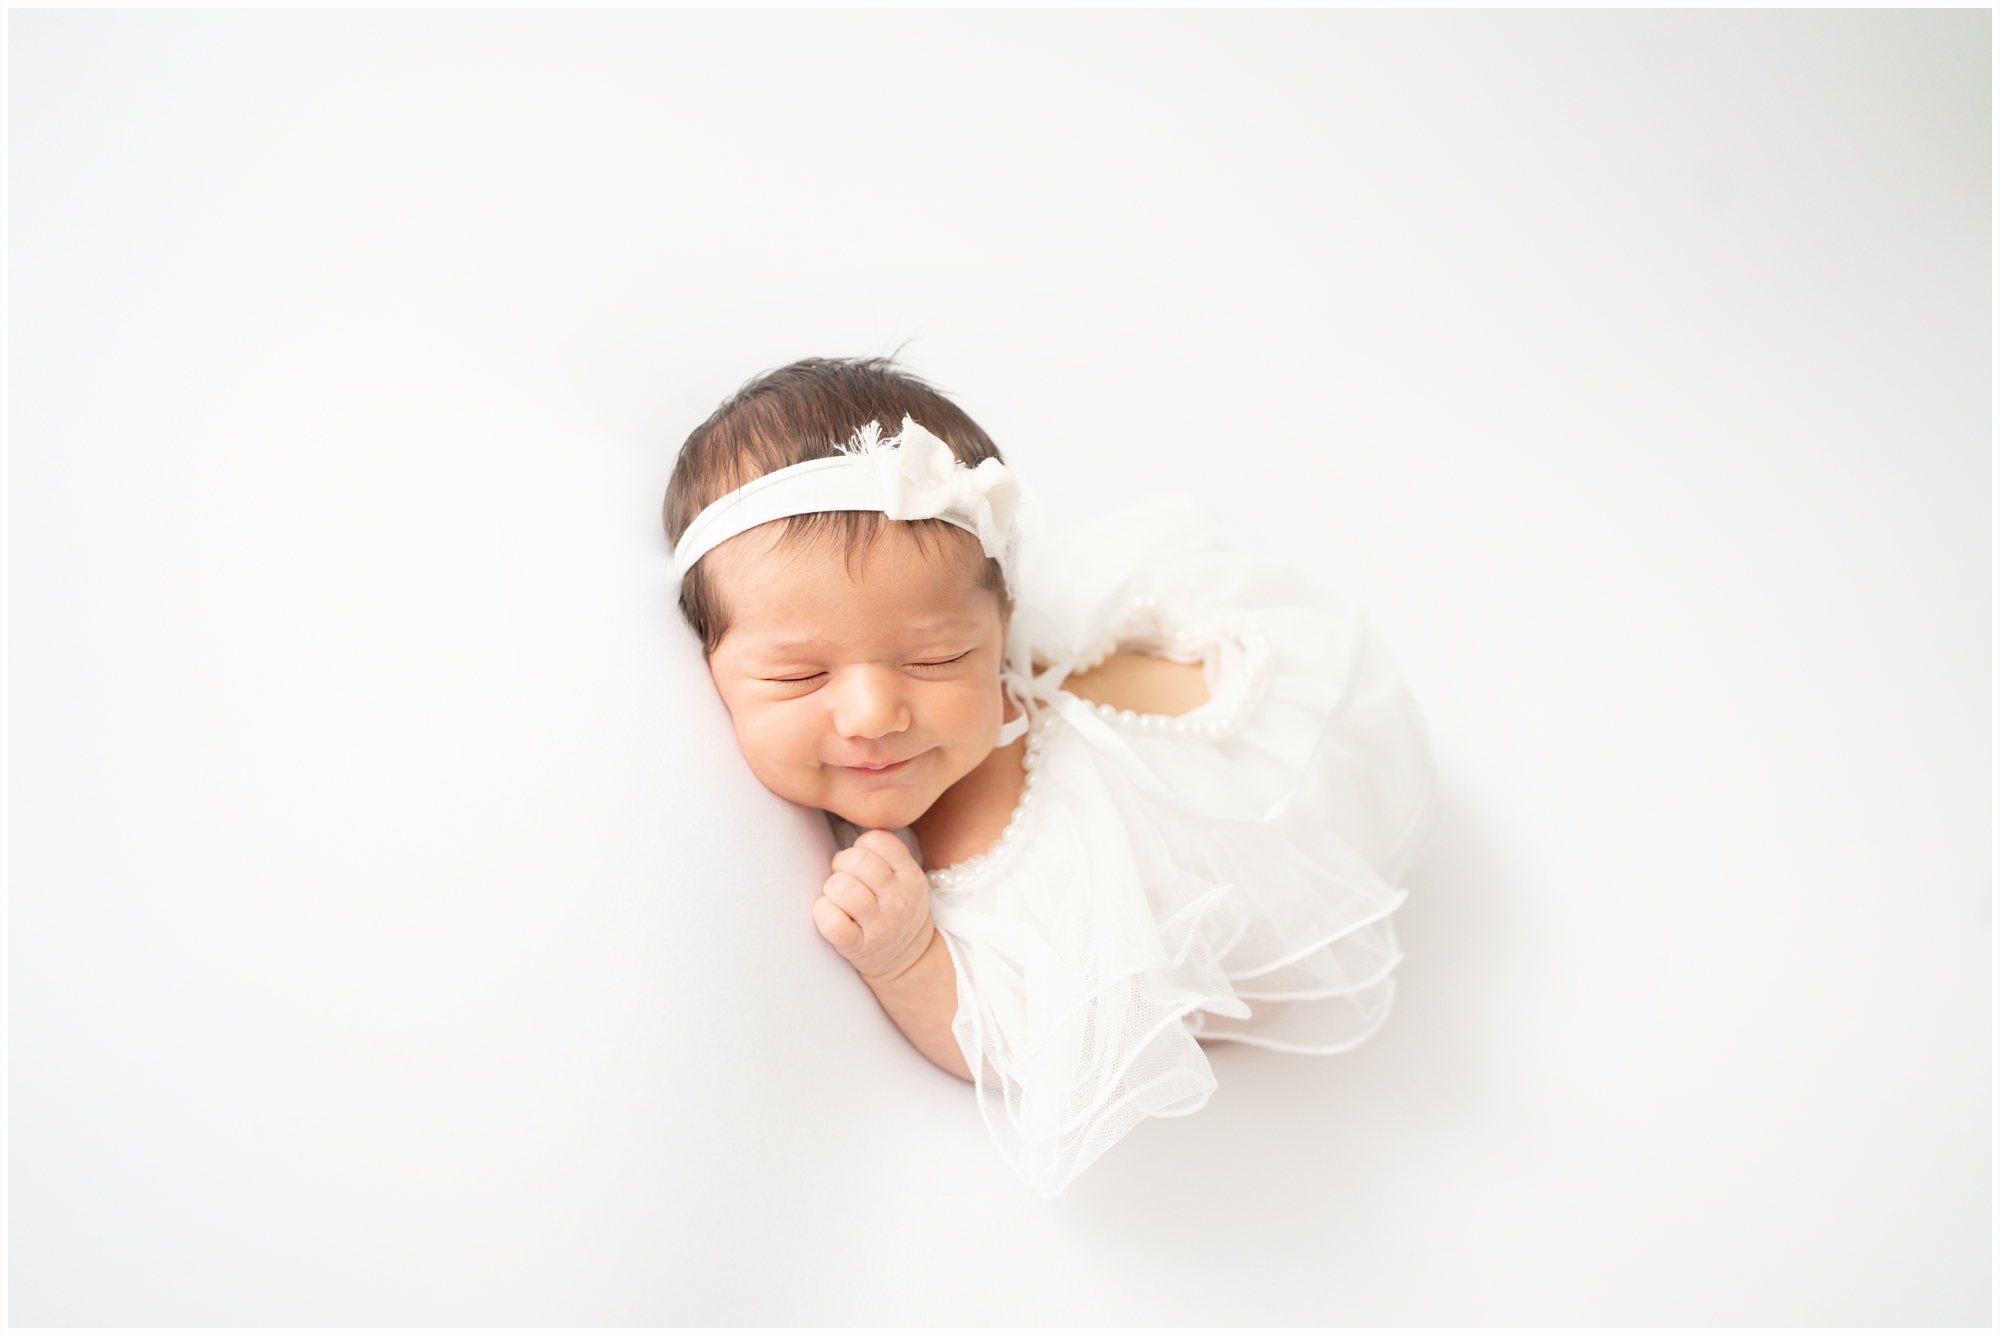 New baby at her first Newborn photoshoots wearing a while baby outfit with pearls.